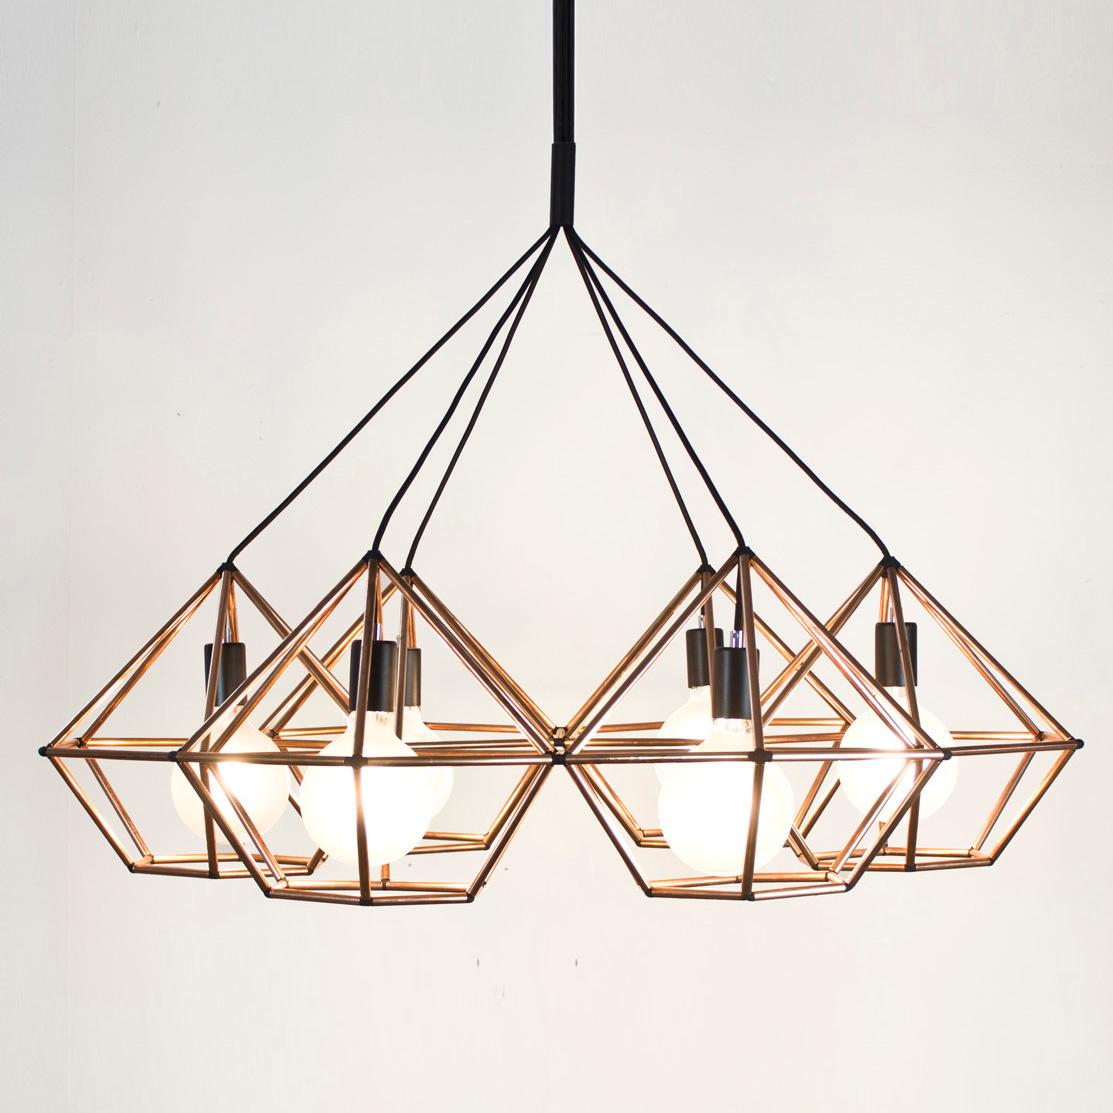 Rough diamond chandelier is a decorative fixture that combines handmade craftsmanship with digital technology. The design combines a 3D printed joining system with hand cut and assembled copper or brass tube. The result is a decorative feature light